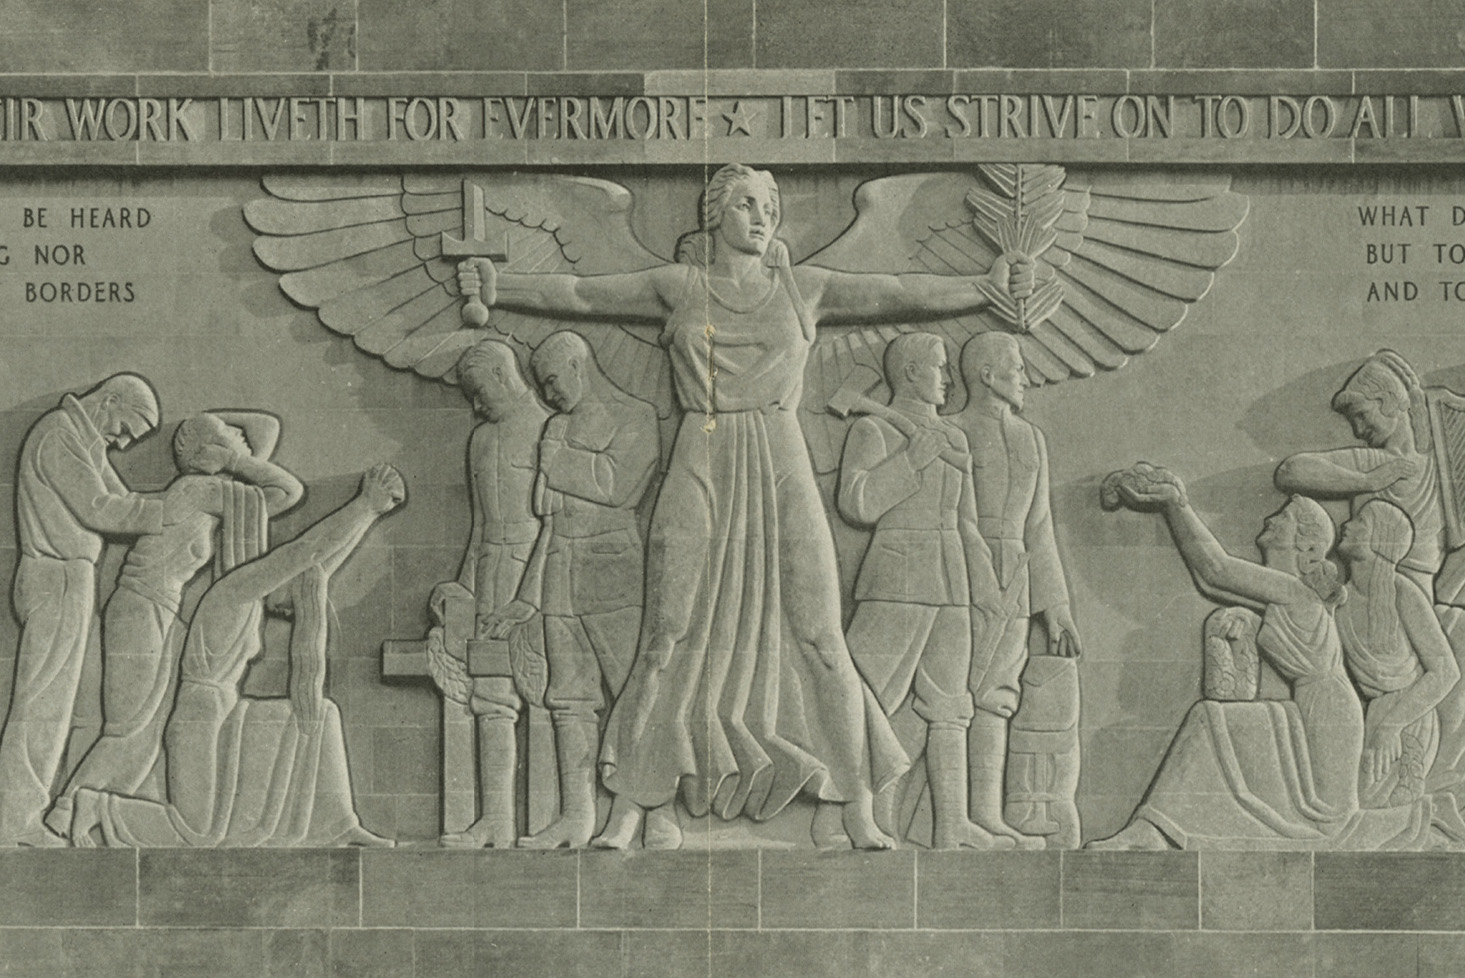 Photograph of carved bas-relief figures in a stone wall. A winged figure stands in the center holding a sword and an olive branch.